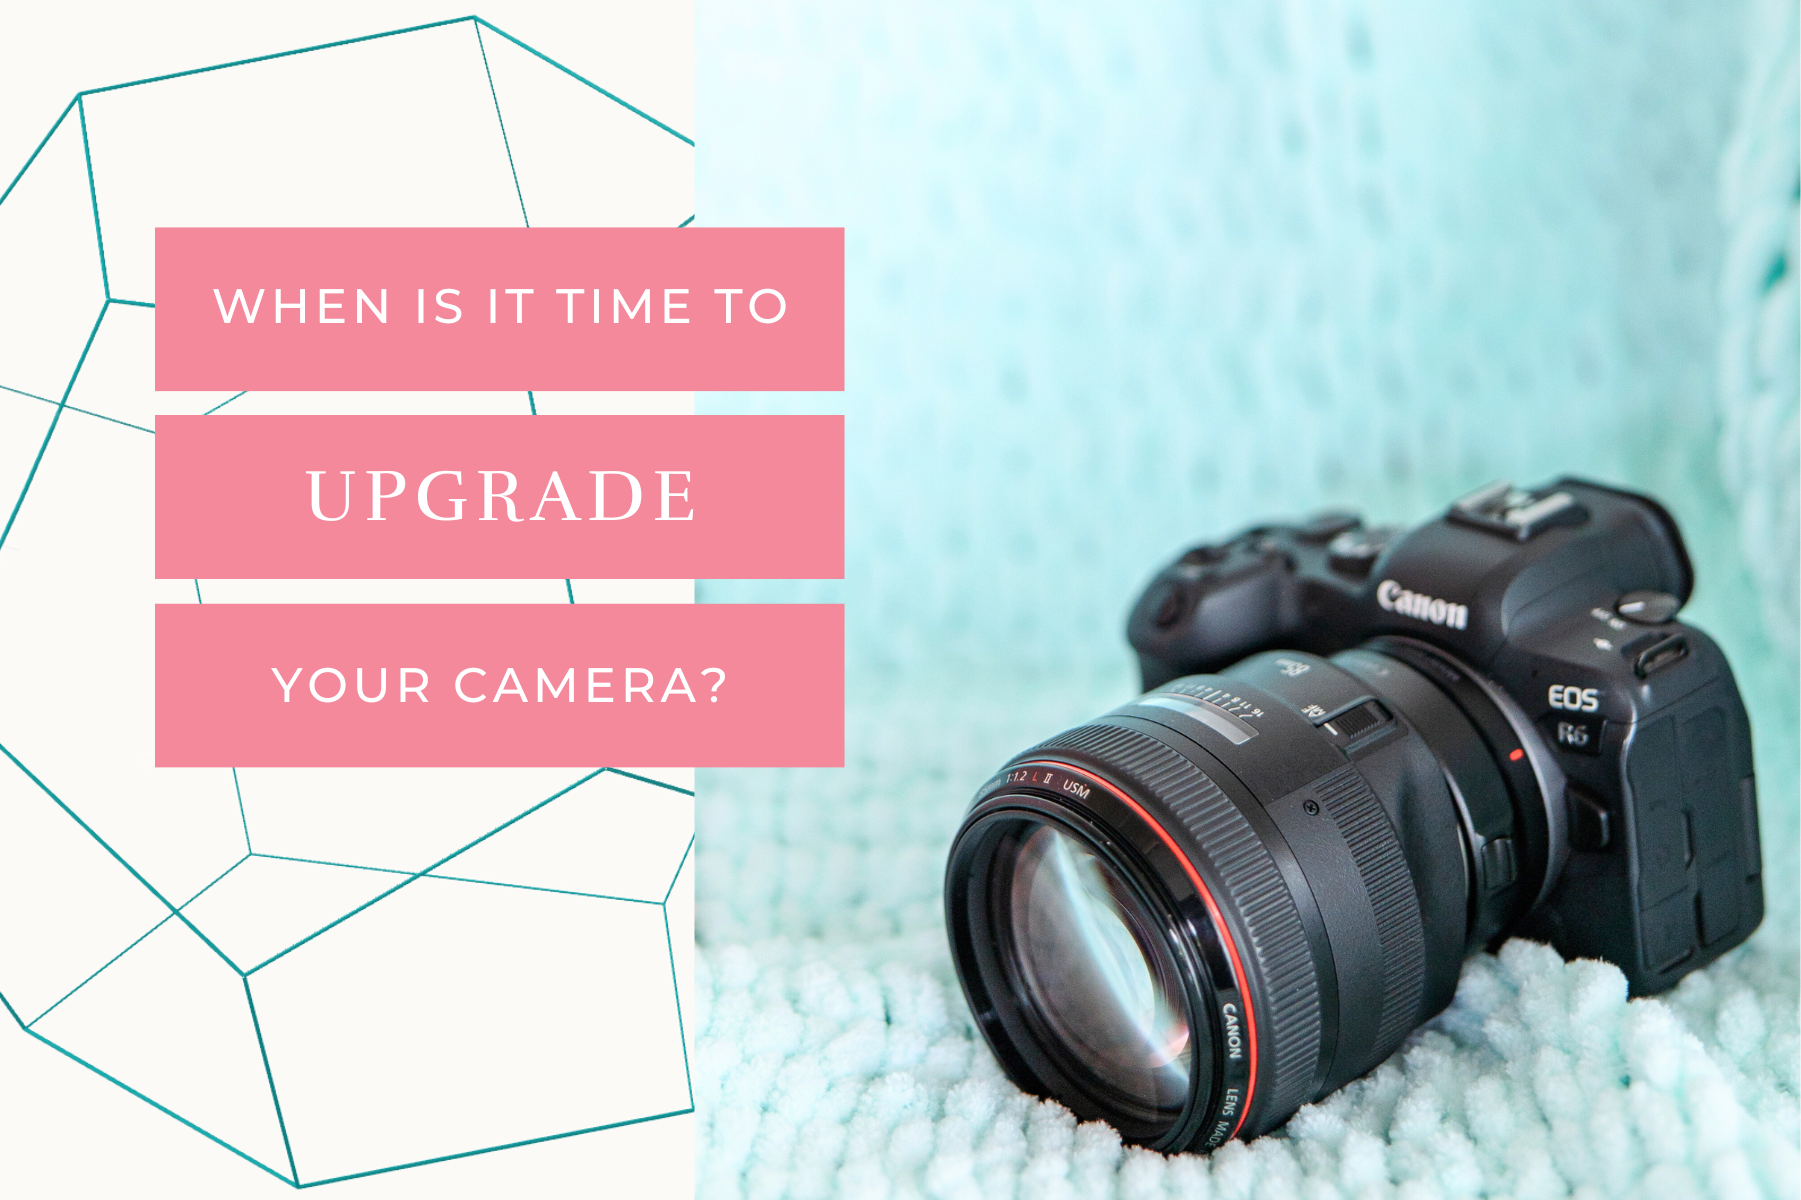 When Is It Time to Upgrade Your Camera cover photo